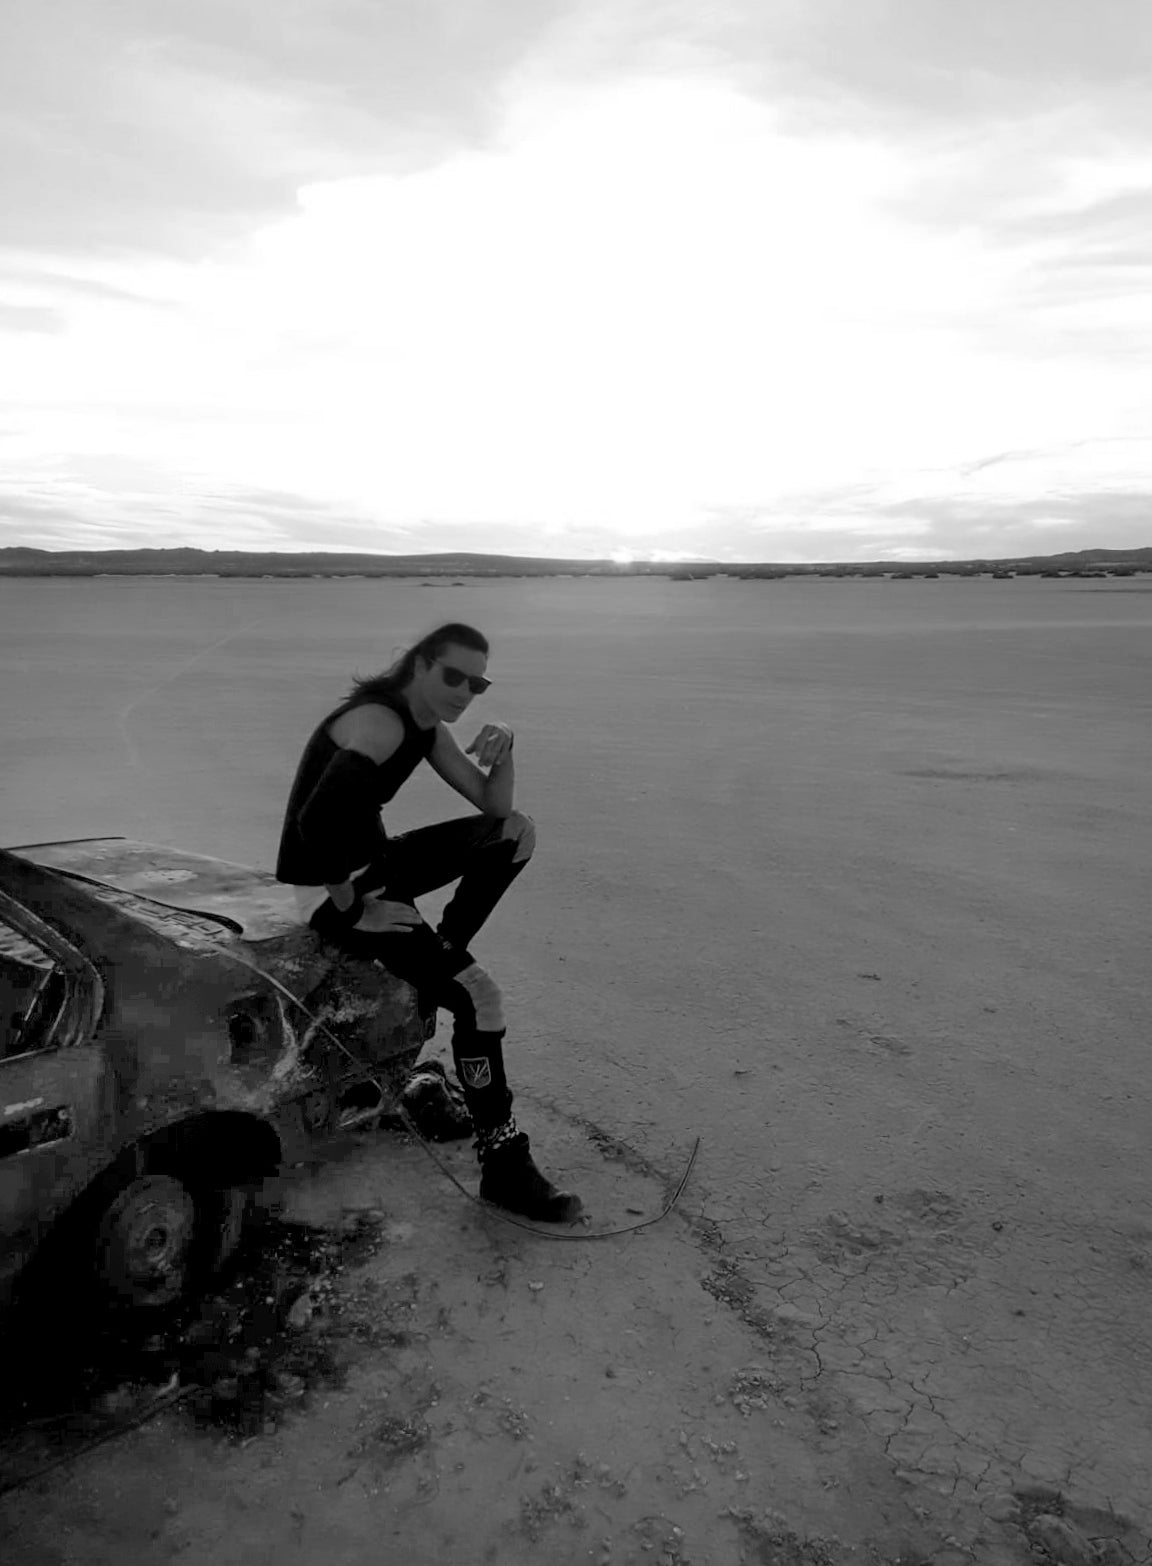 Fine art photographer Mark Maryanovich wearing sunglasses sitting on trunk of burned out car parked in middle of desert in black and white